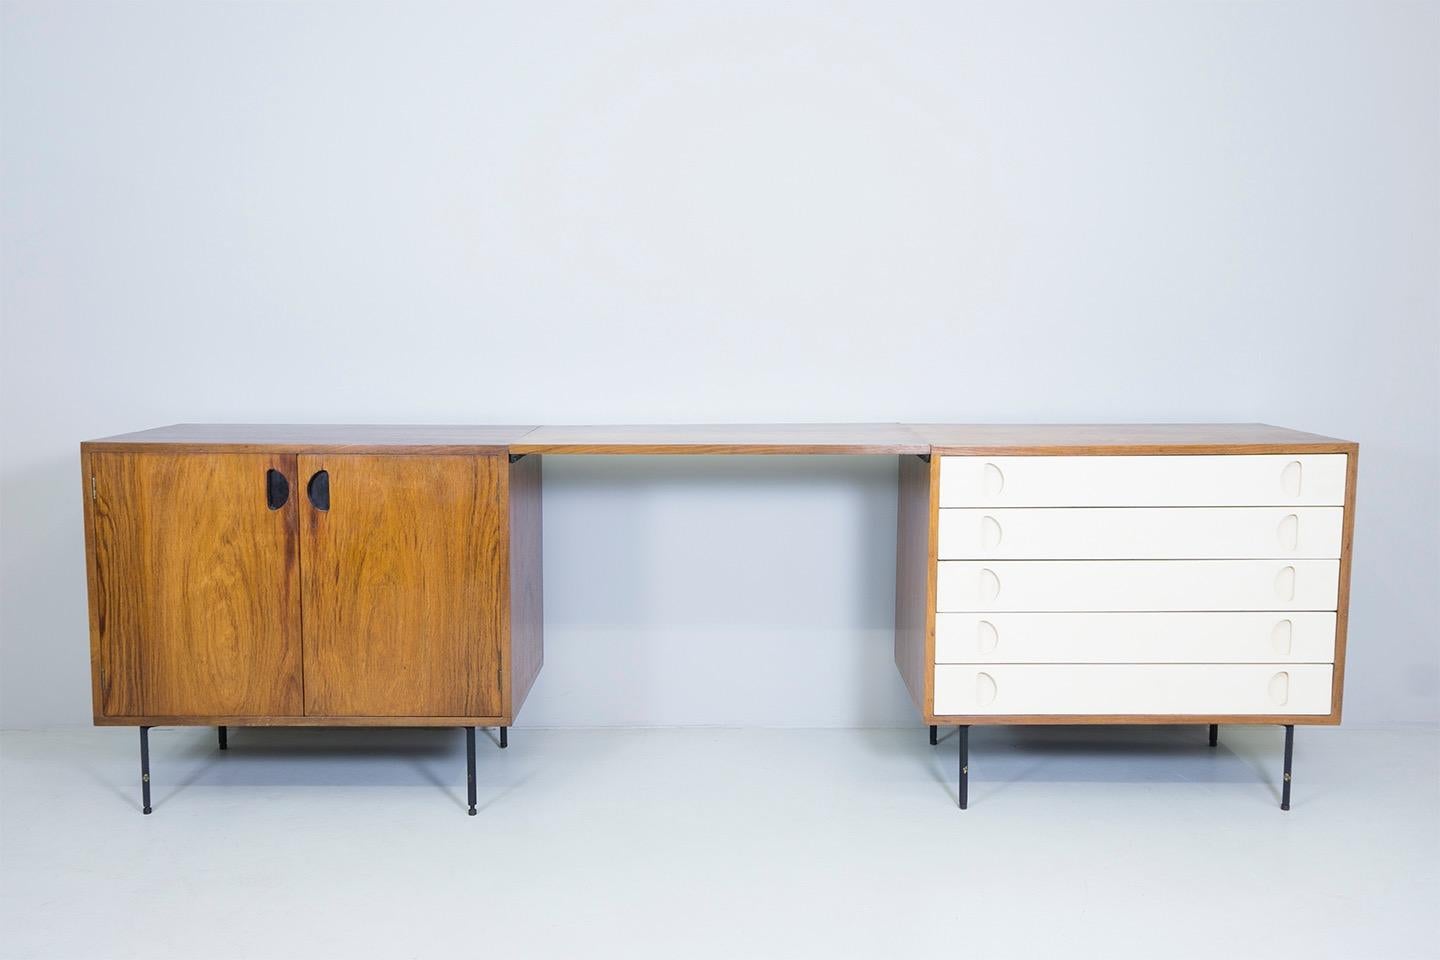 Sideboard with drawers and doors made of veneered with teak wood and palisander
adjustable enameled metal stands.
Dimensions: H.73cm, W.240cm, L.45cm
Design: Carlo Graffi 1958
Manufacturer: Home Torino.